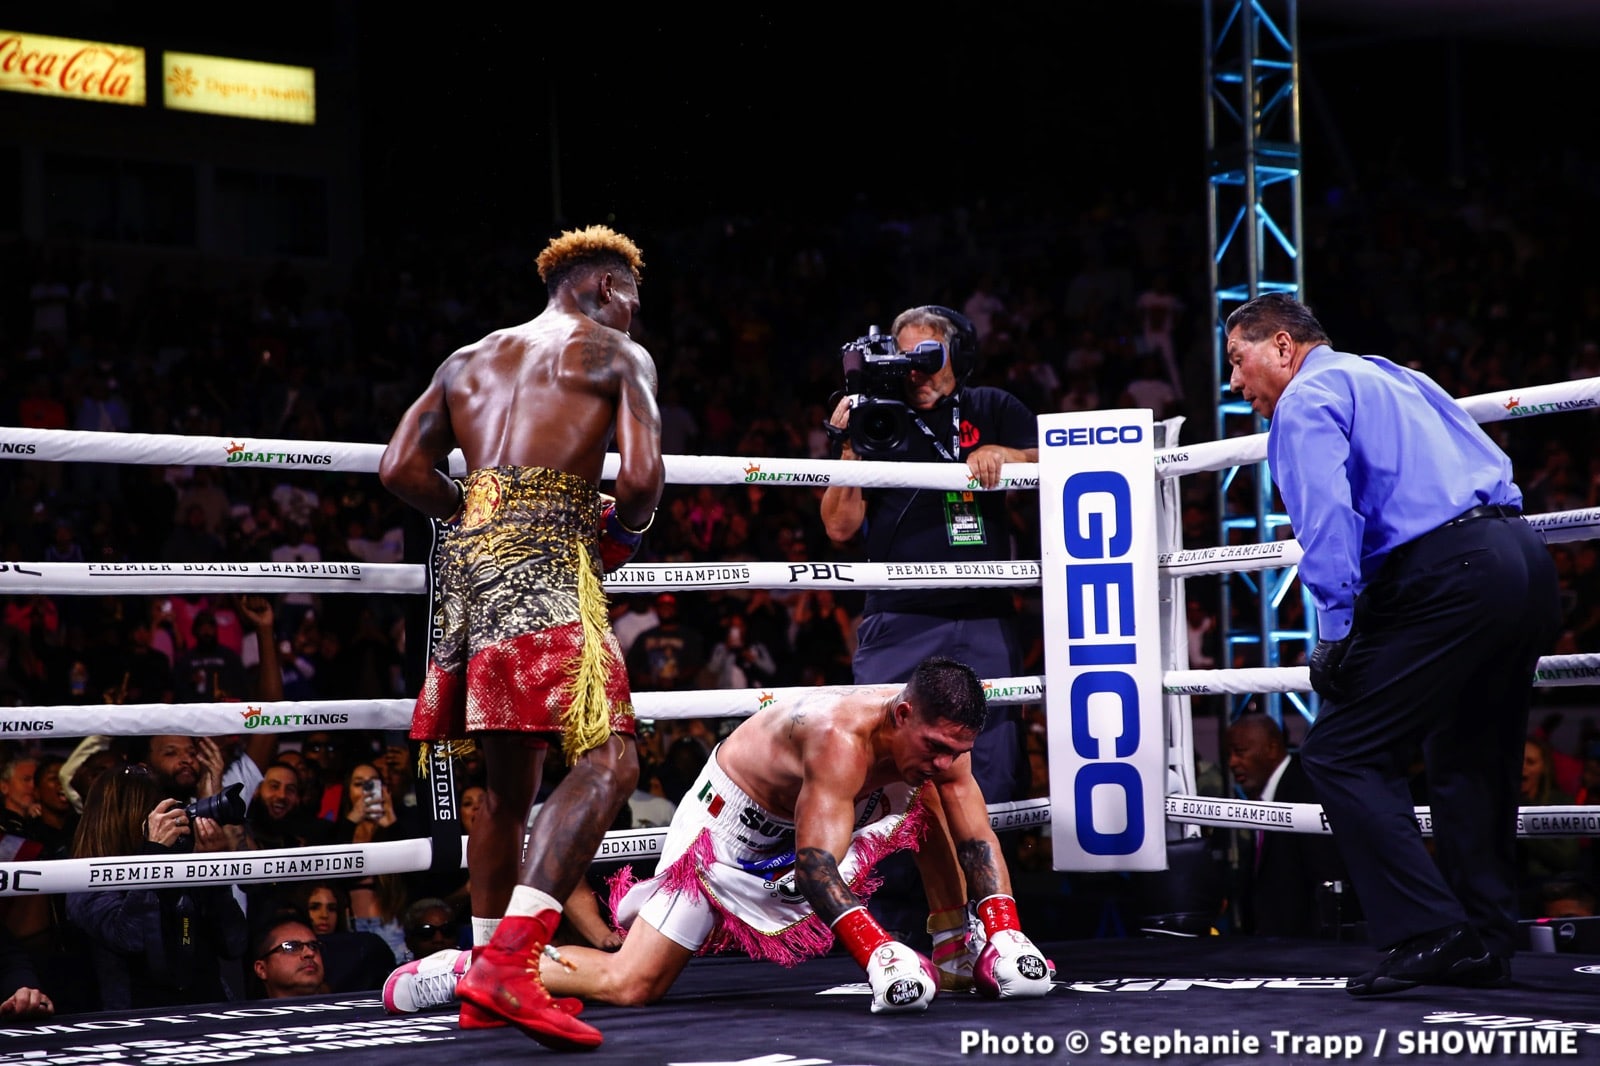 Image: Results / Photos: Jermell Charlo defeats Castano, becomes undisputed!